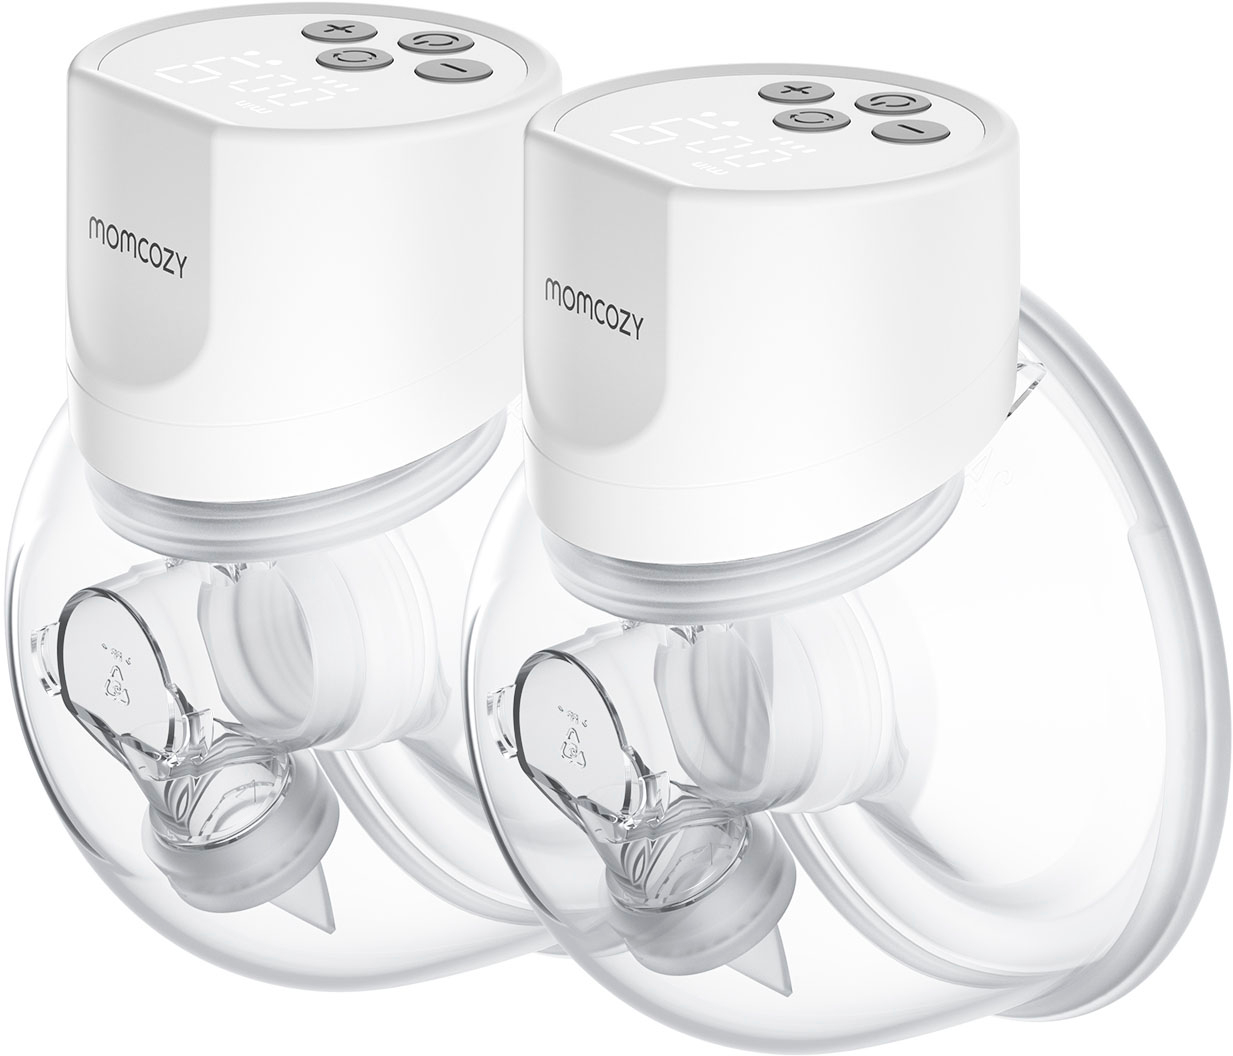 Medela Freestyle Mobile Double Electric Breast Pump 2day Delivery for sale  online